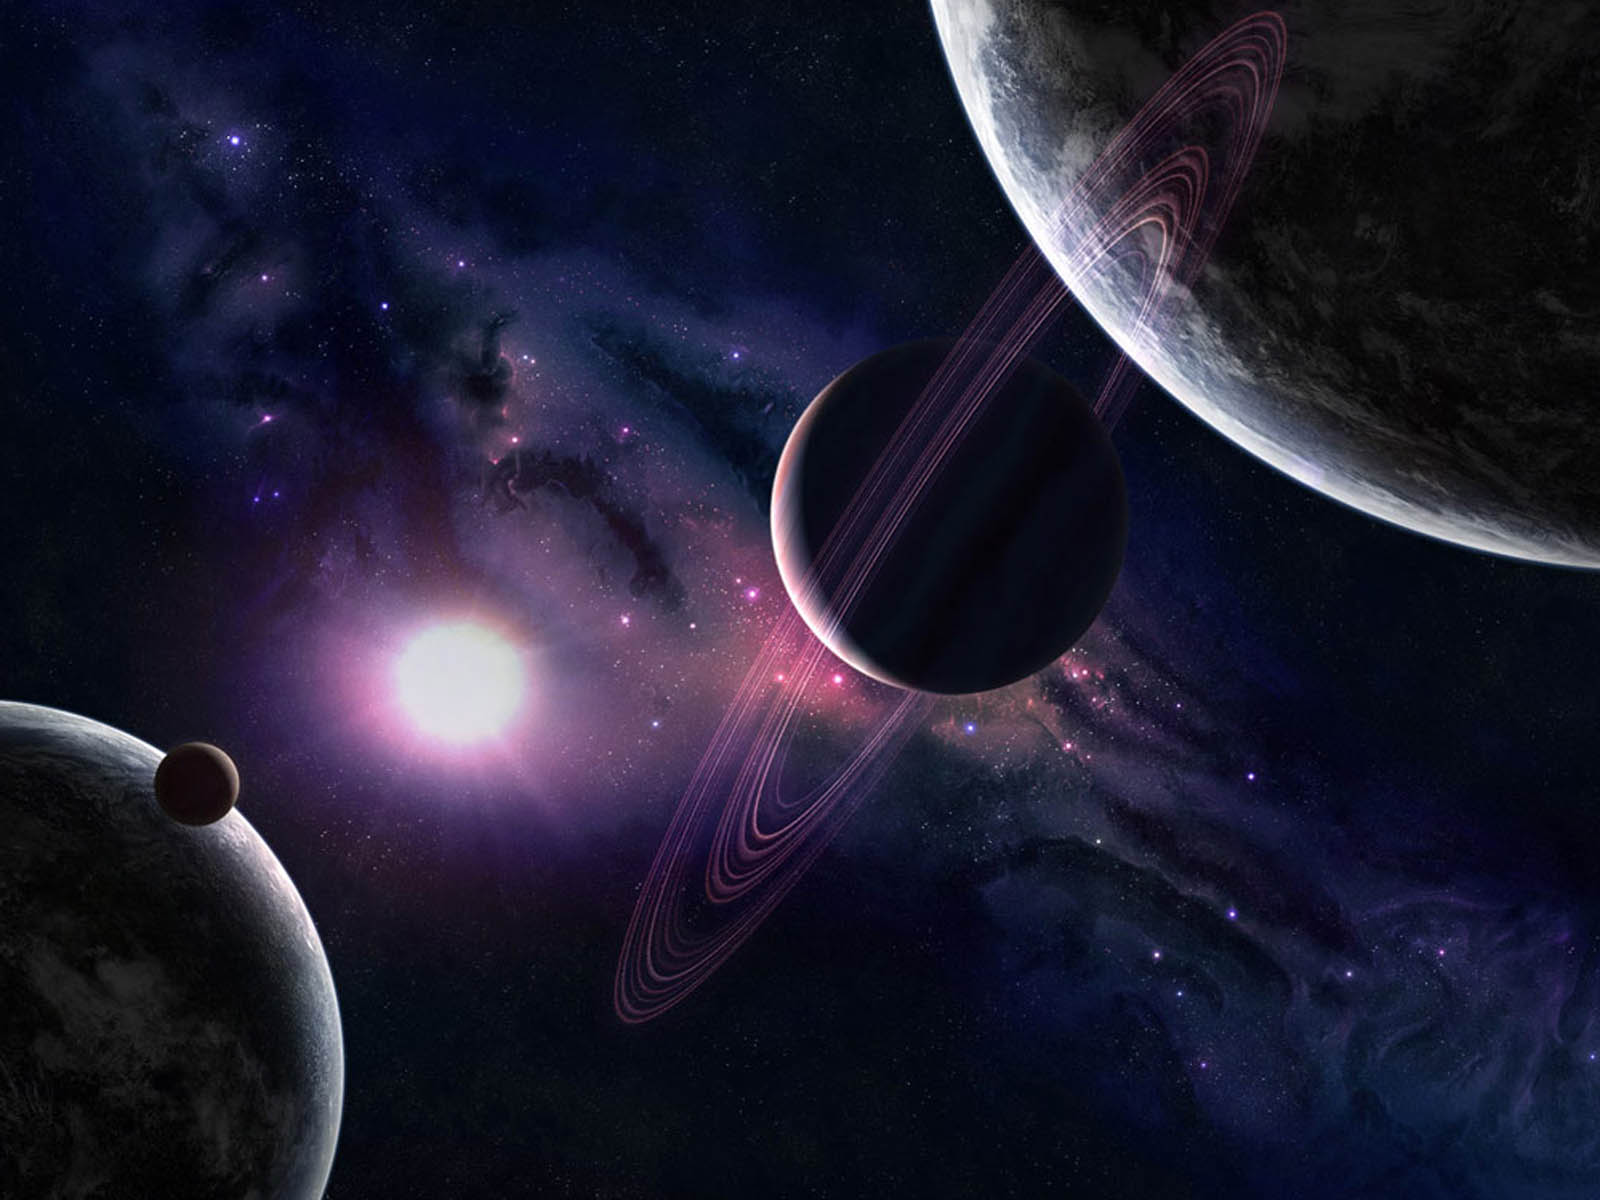 Tag Solar System Wallpaper Background Photos Image And Pictures